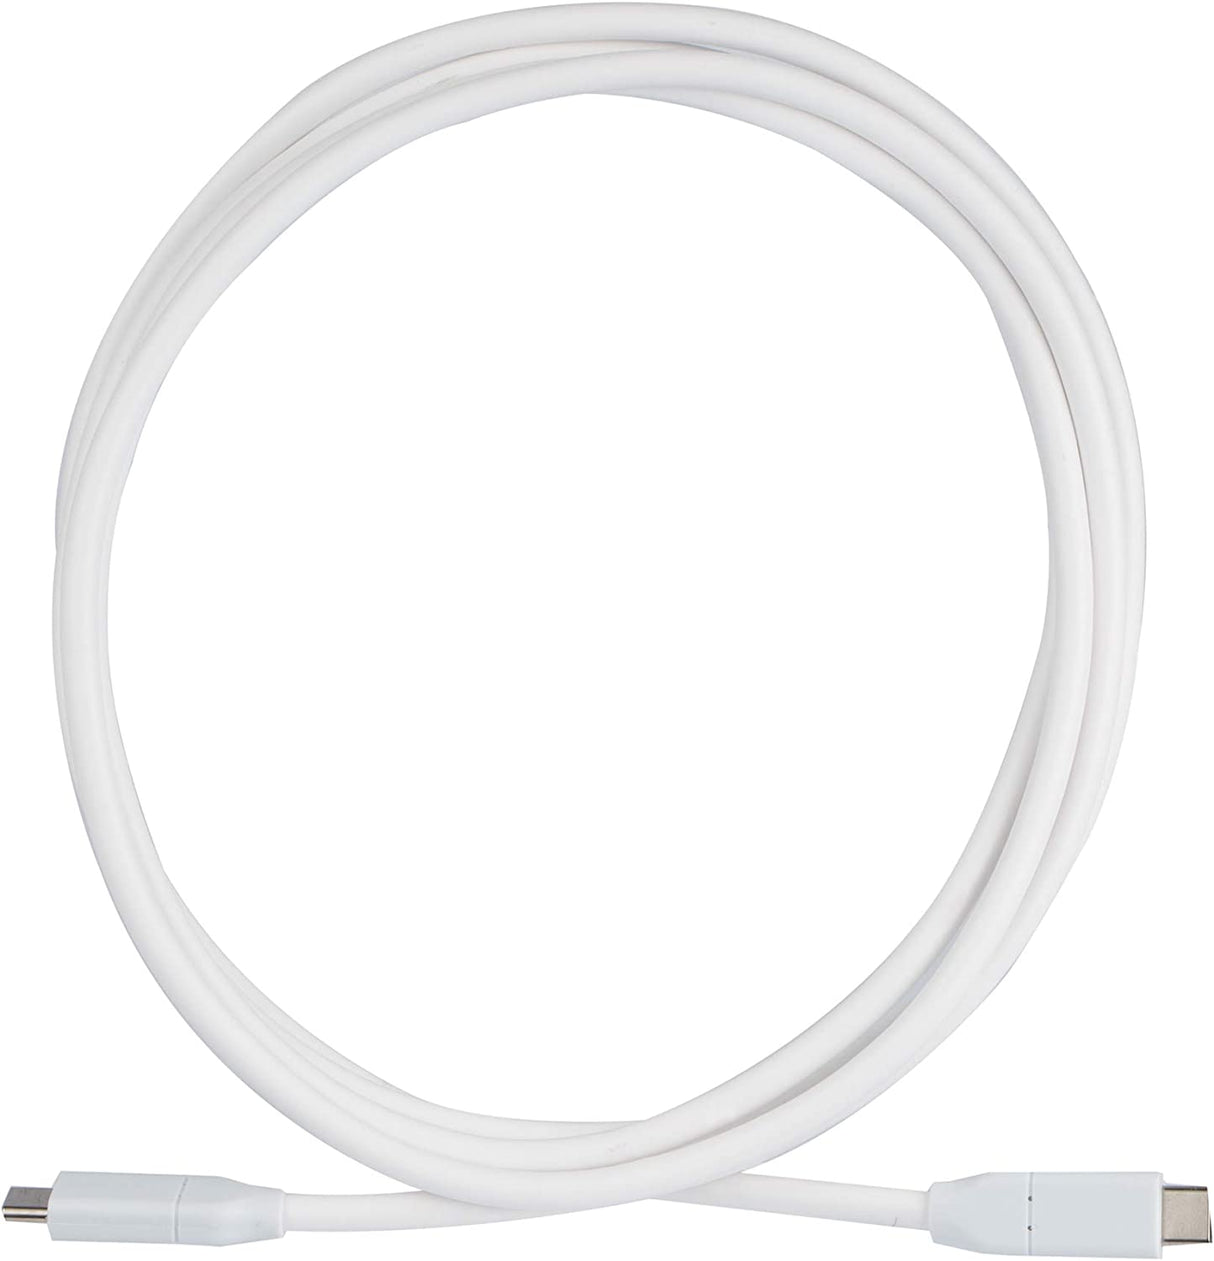 StarTech.com USB C to USB C Cable - 6 ft / 2m - 5A PD - M/M - White - USB 2.0 - USB-IF Certified - USB Type C Cable - USB C Charging Cable (USB2C5C2MW) White 6 ft/ 2 m